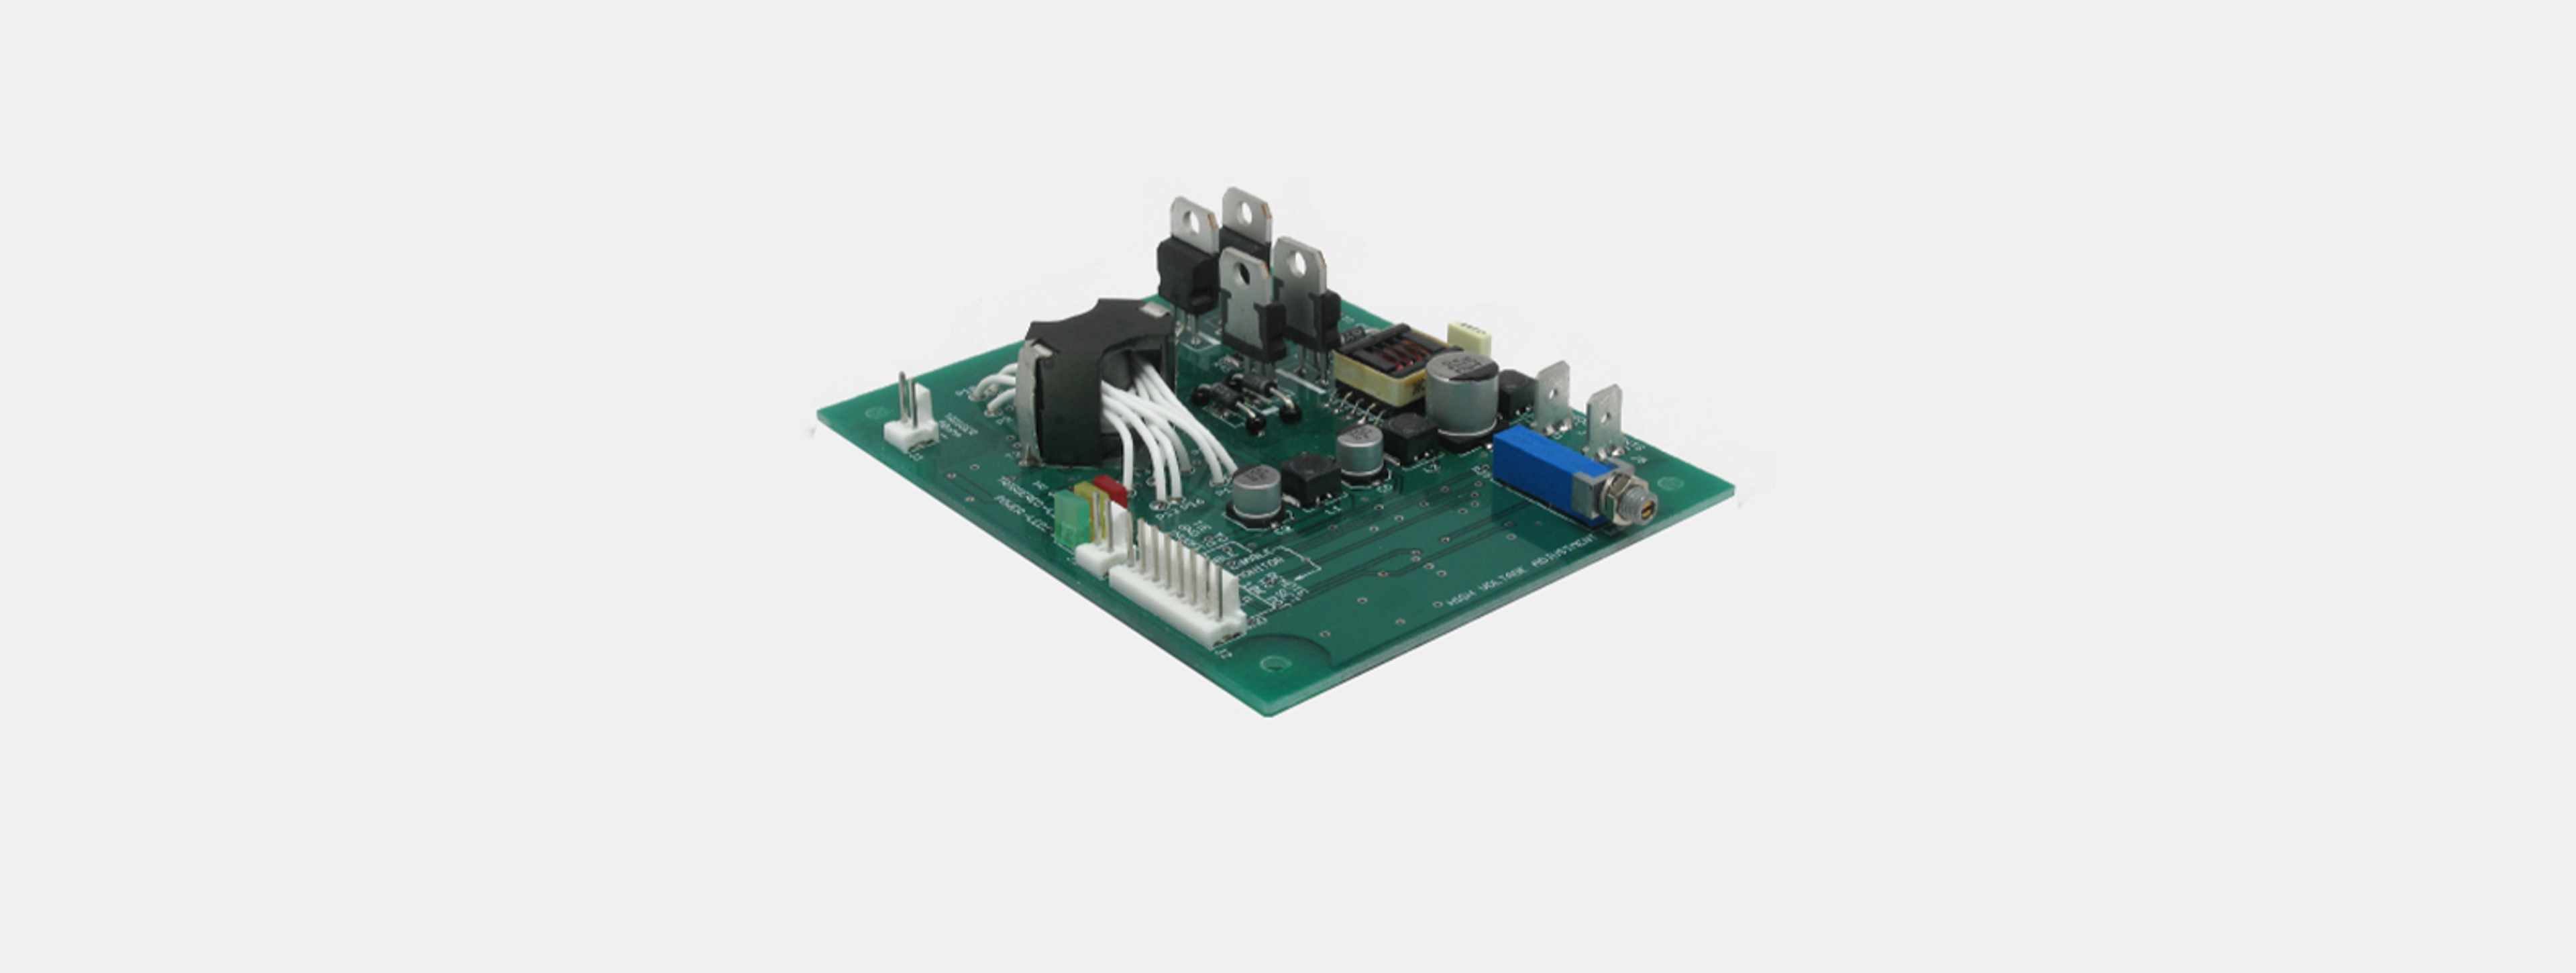 Q-Drive™ OEM KD*P Pockels Cell Driver product images